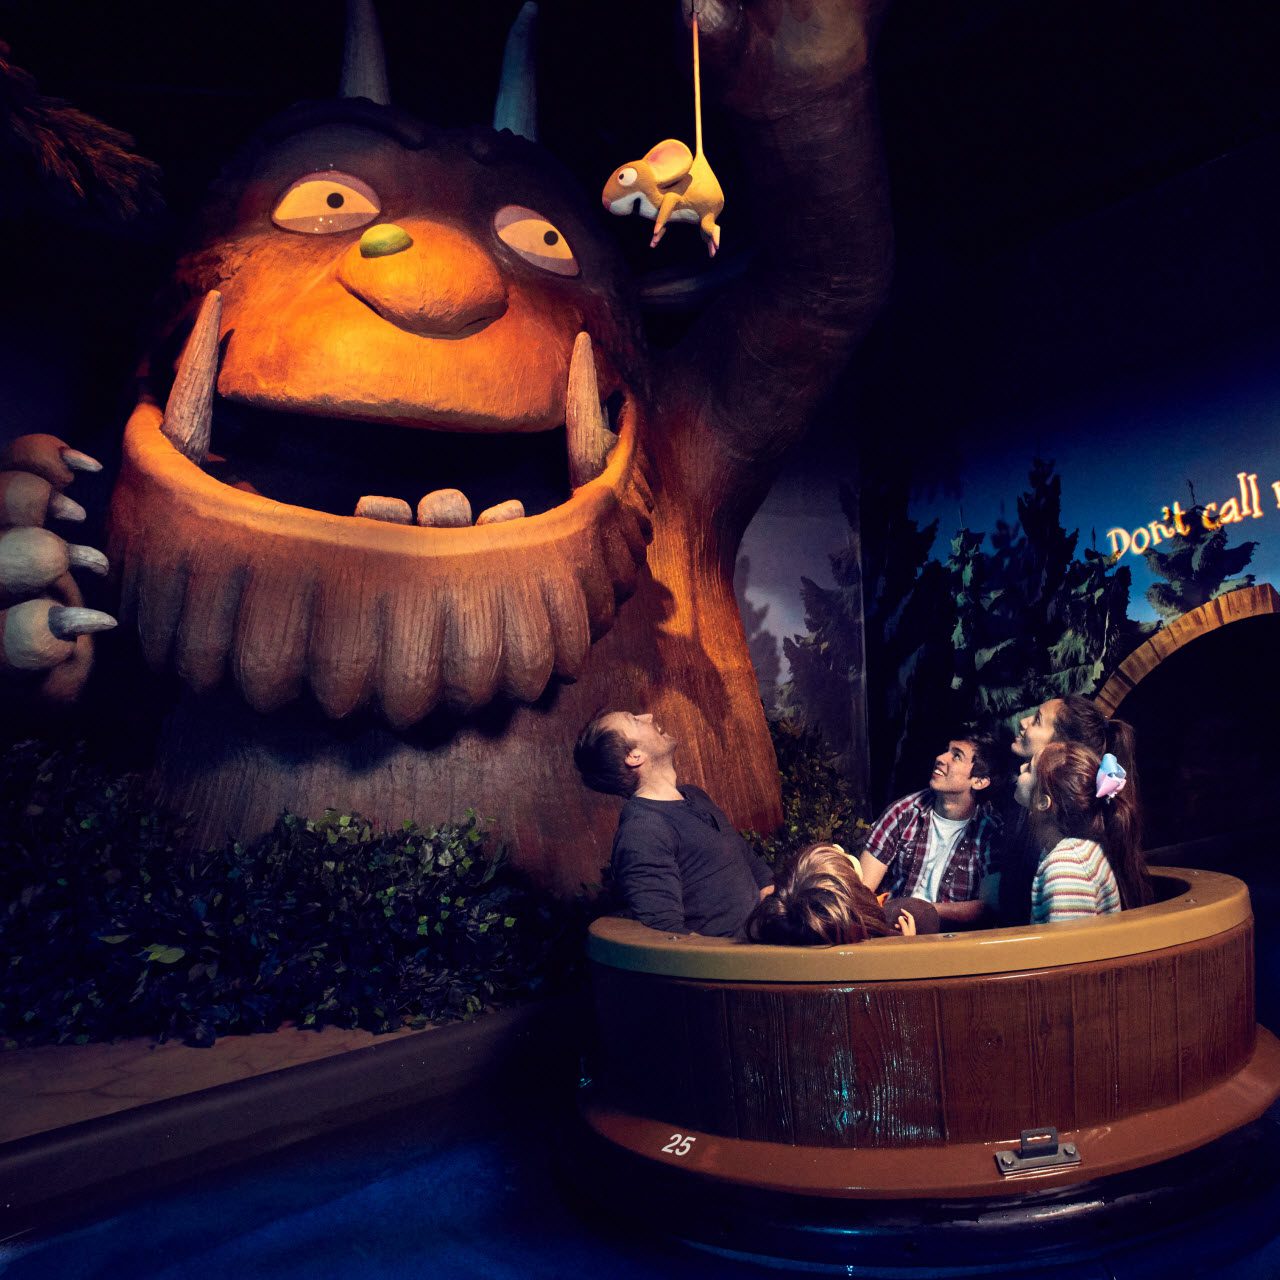 The inside of the Gruffalo ride with 5 people in a boat with a large Gruffalo sculpture to the left